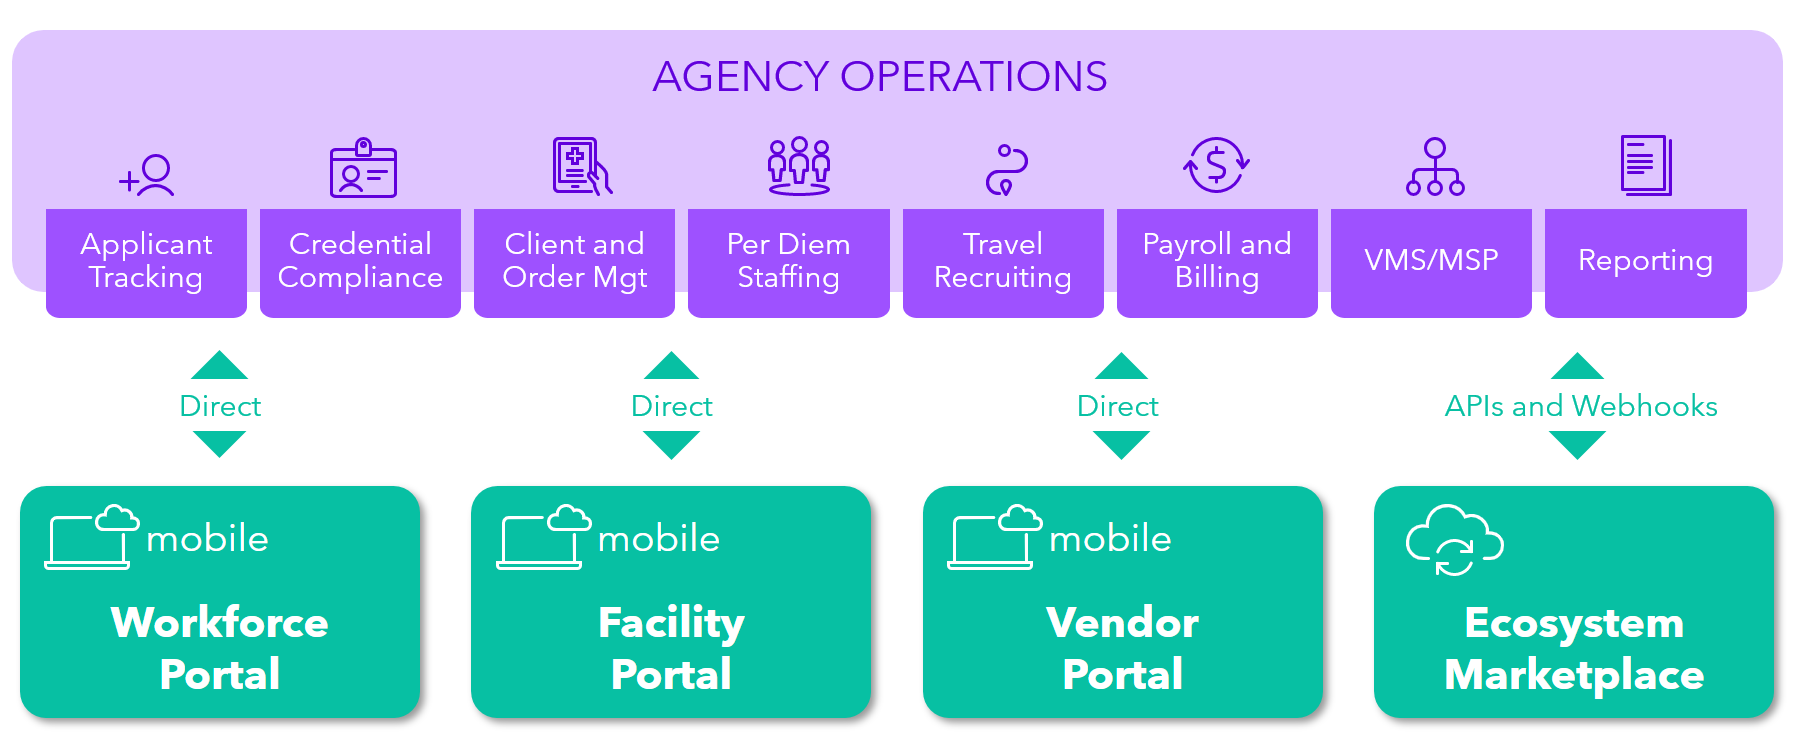 Agency Operations